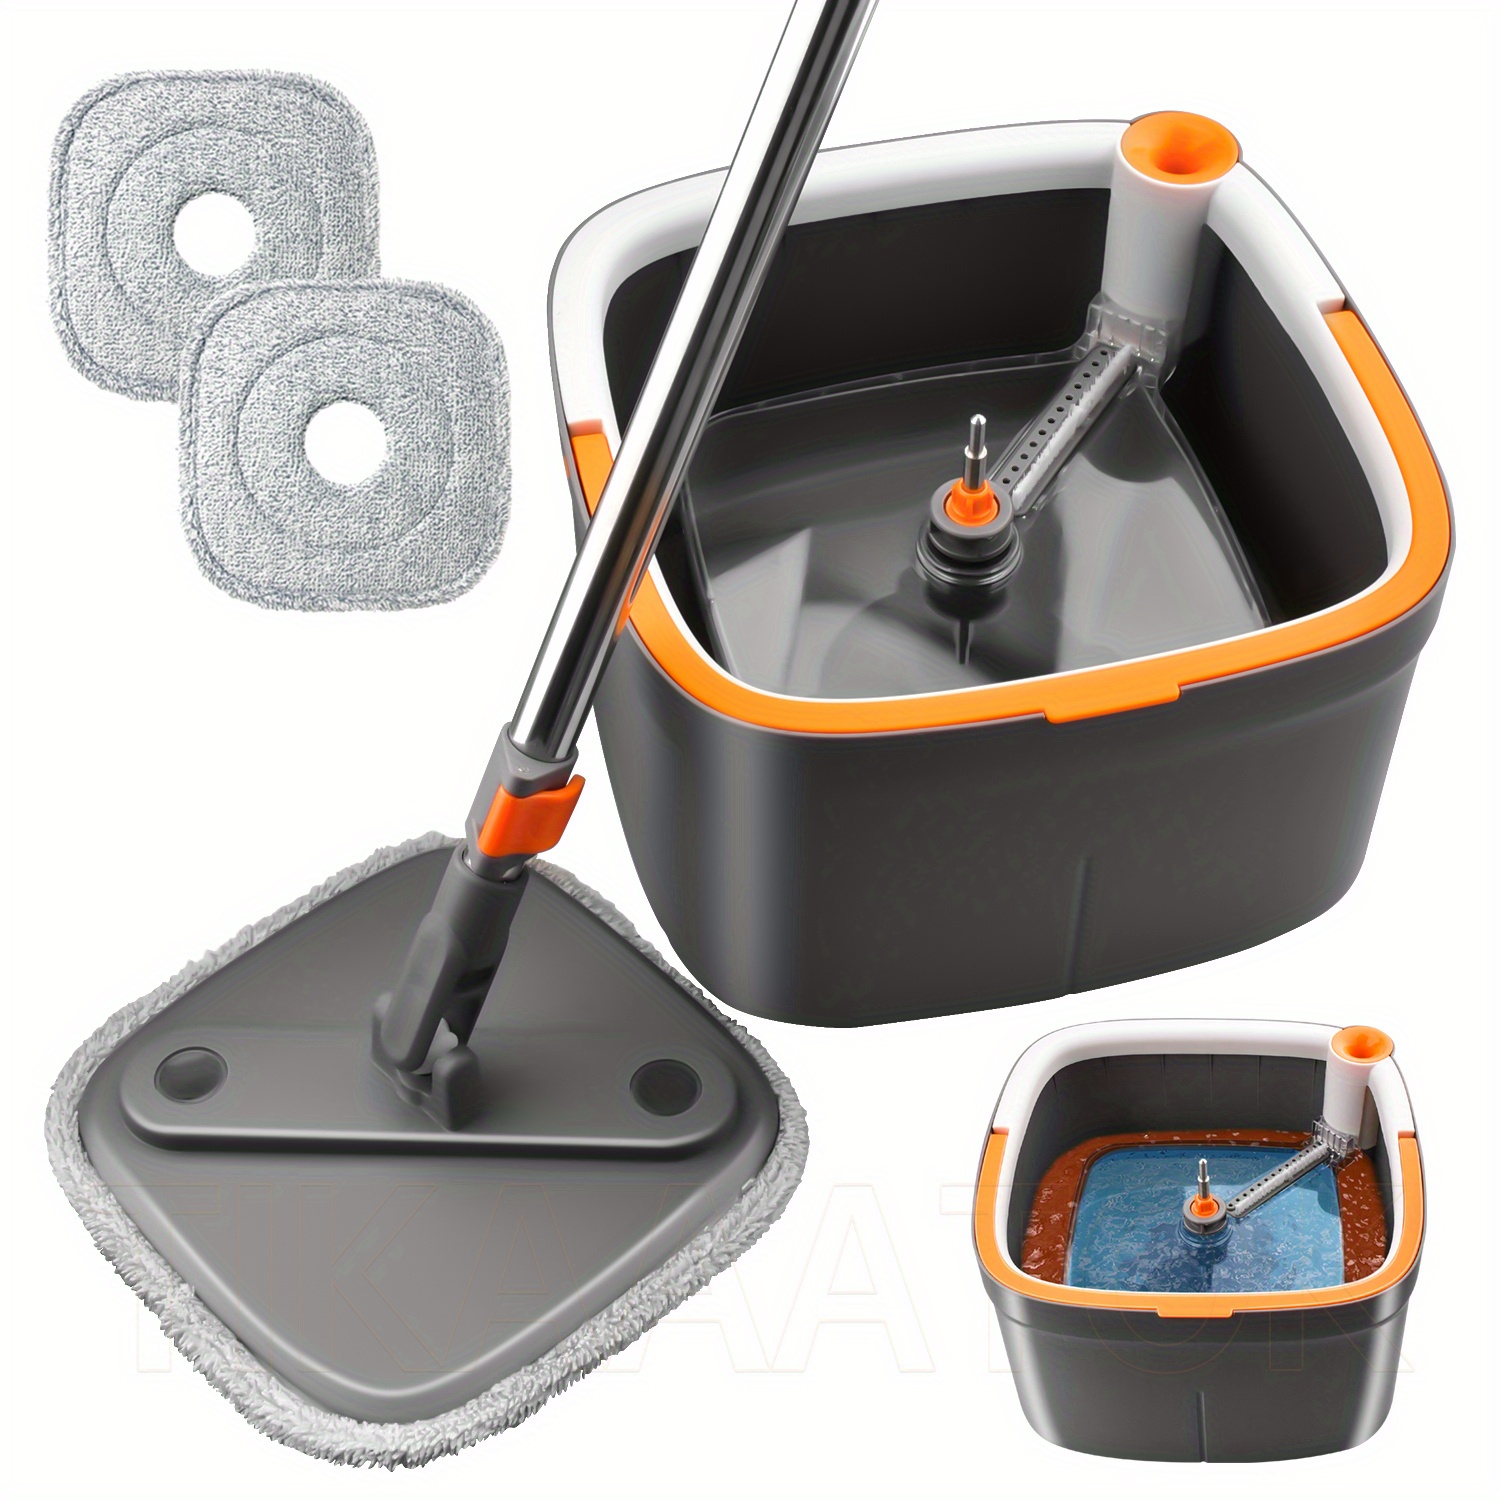 

Spin Mop And Bucket With Wringer Set Support Self Separation Sewage And Clean Water Telescopic Stainless-steel Mop Cleaning Bucket Mop For Floors Kitchen, With 2/ 6 Mops